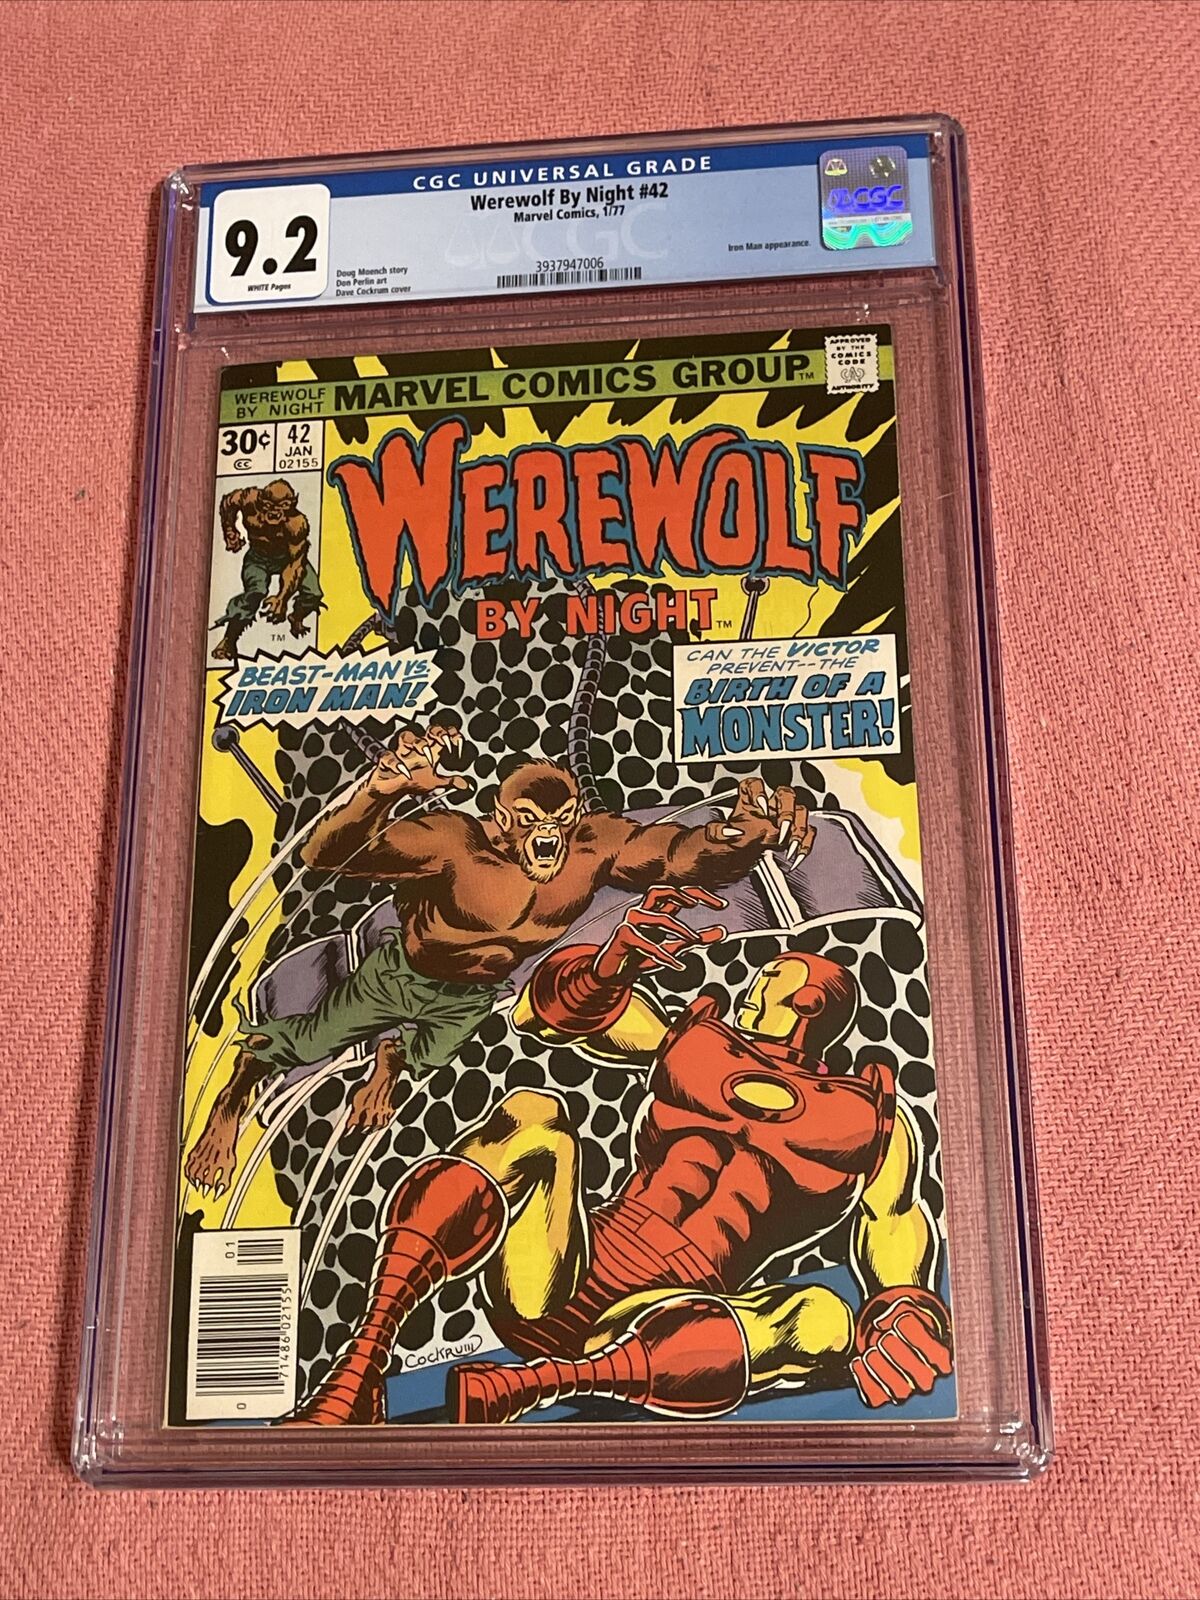 Werewolf By Night #42 CGC 9.2 White Pages, Iron Man appearance, Marvel